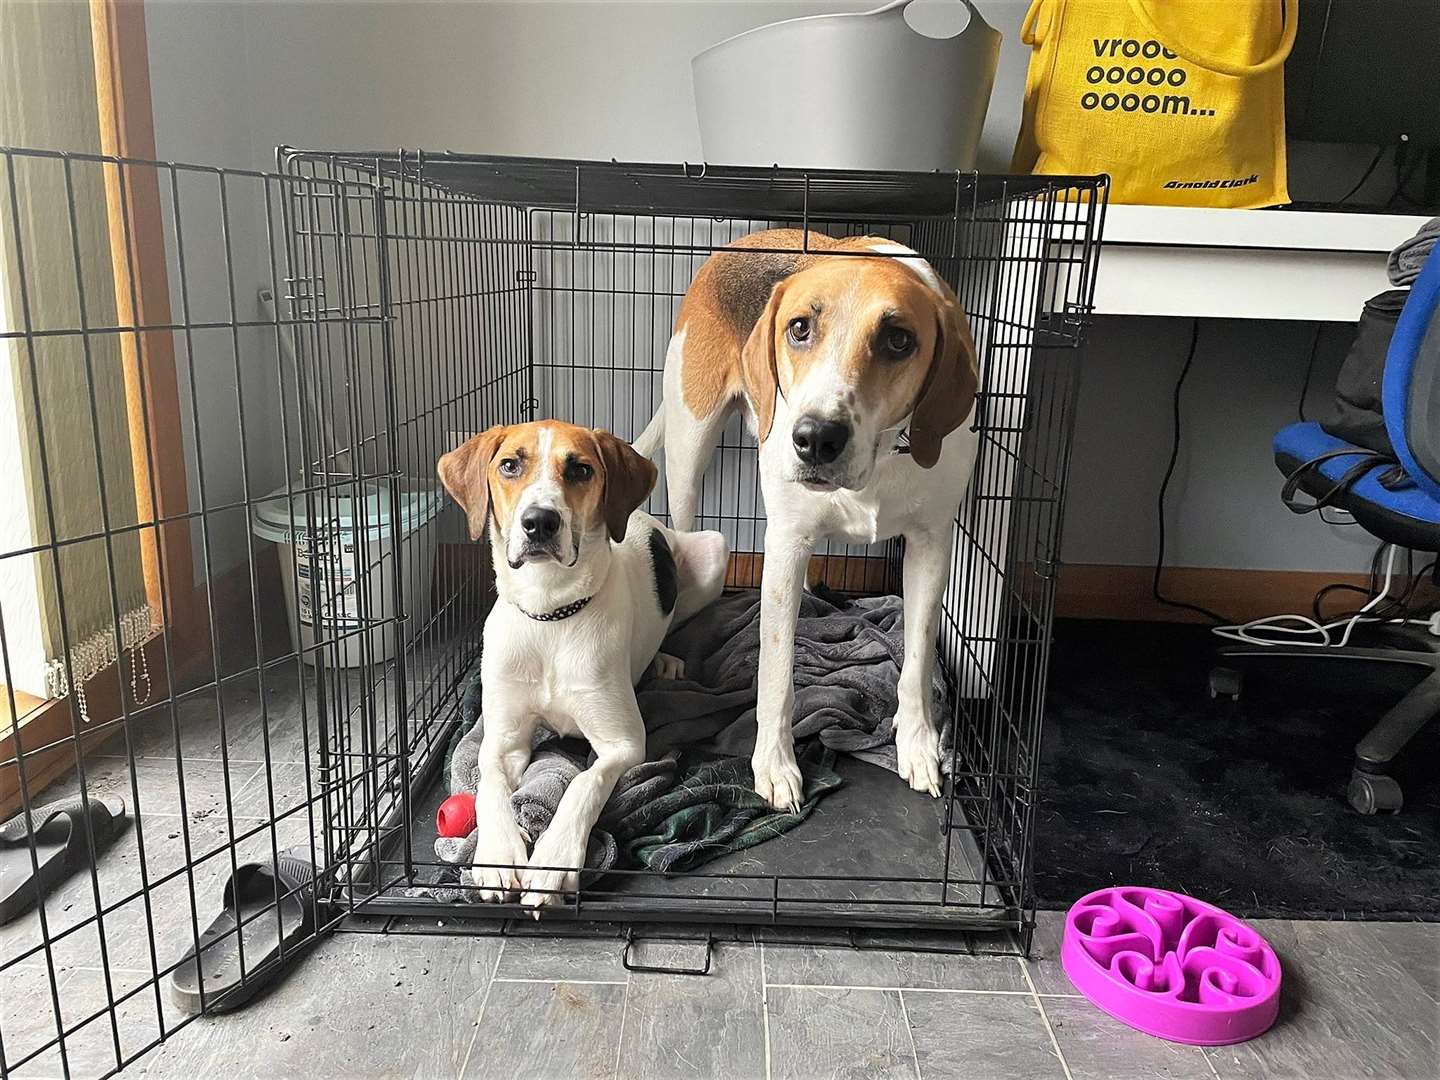 Daisy the foxhound was sold as a beagle and developed kennel cough. Picture: SSPCA